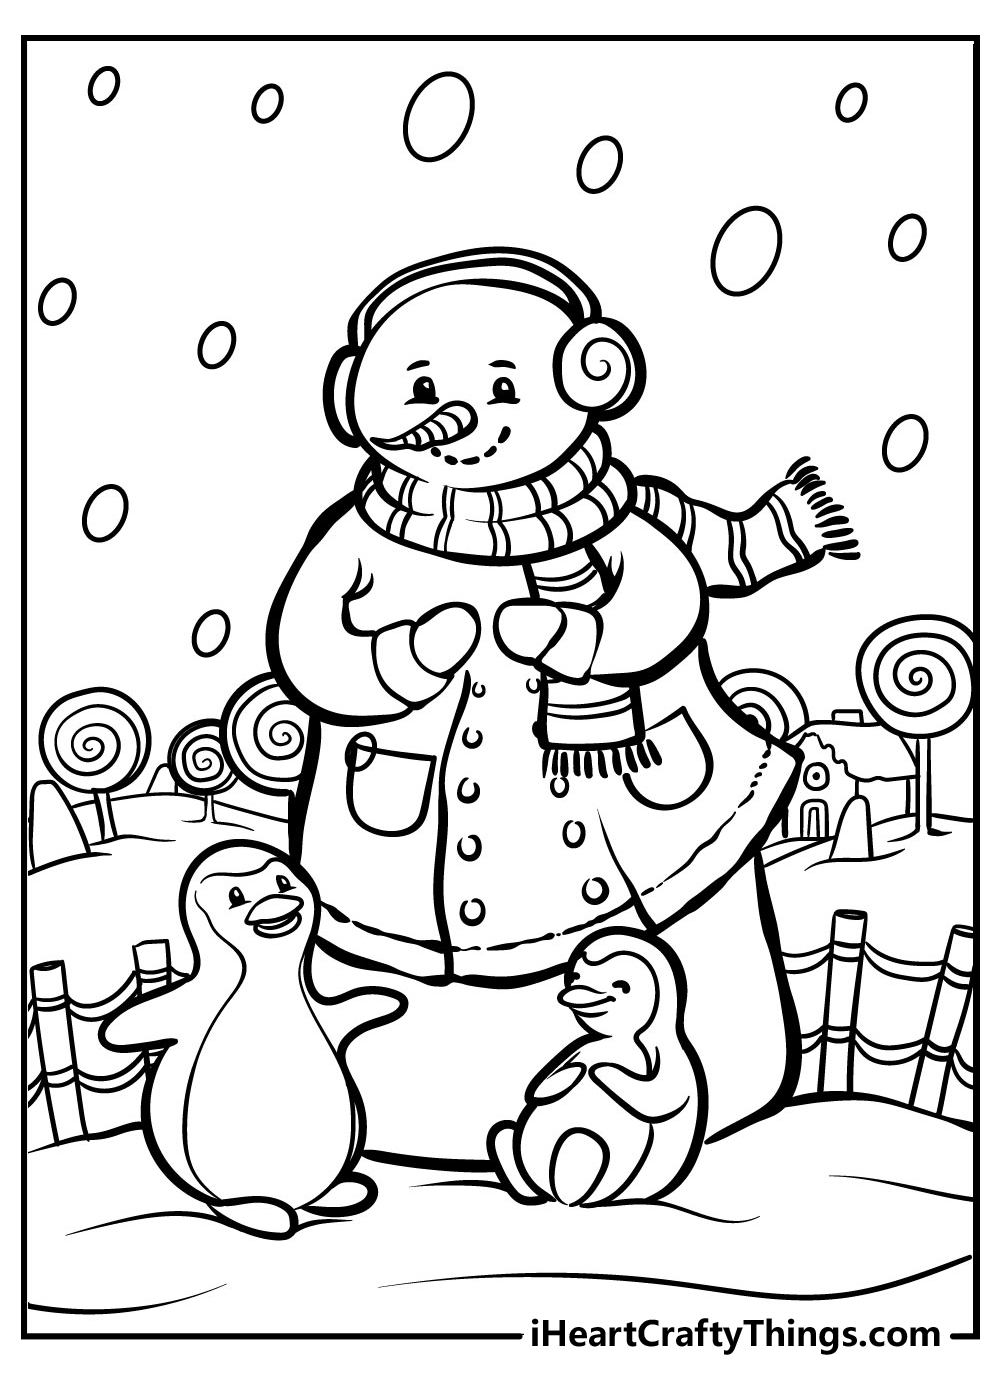 Snowman coloring pages free printables